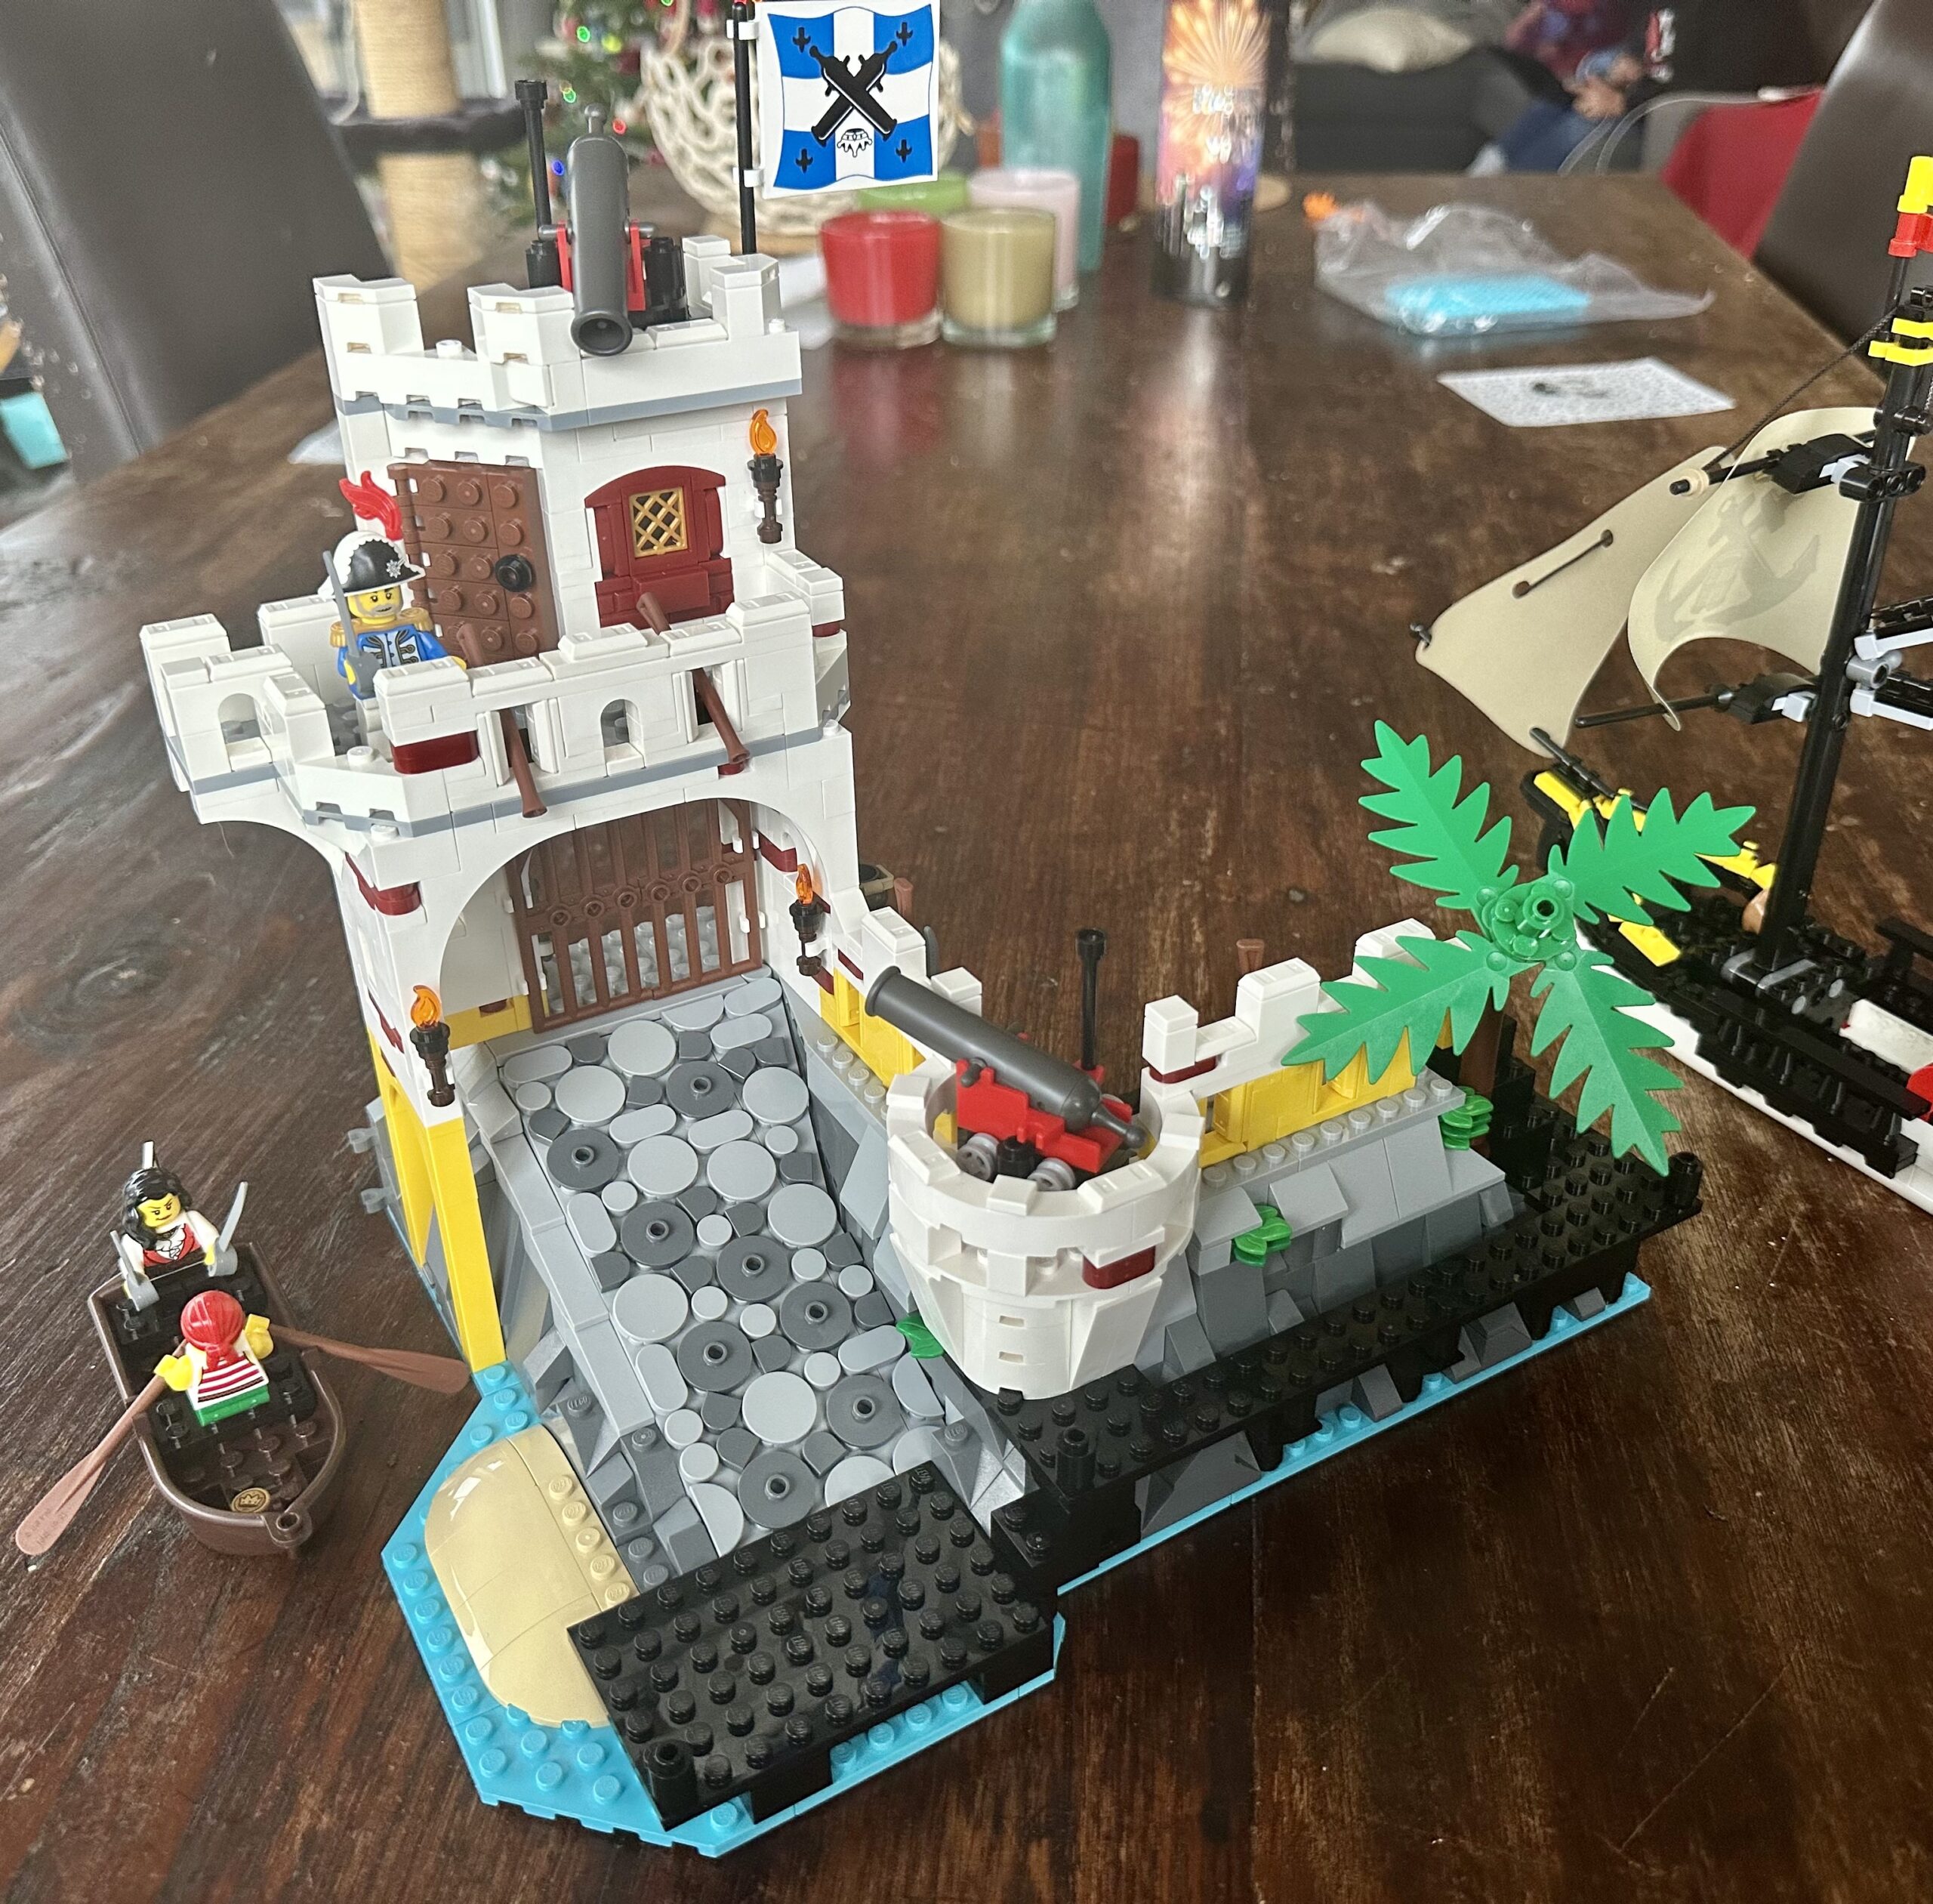 LEGO build of set 10320 Eldorado Fortress in progress. A second story has been added to the gatehouse. It features a balcony with two rifles pointed down at the ramp leading to the gate, a small office with a cannon mounted above it, and a blue and white flag with crossed cannons. An officer stands on the balcony brandishing a cutlass.